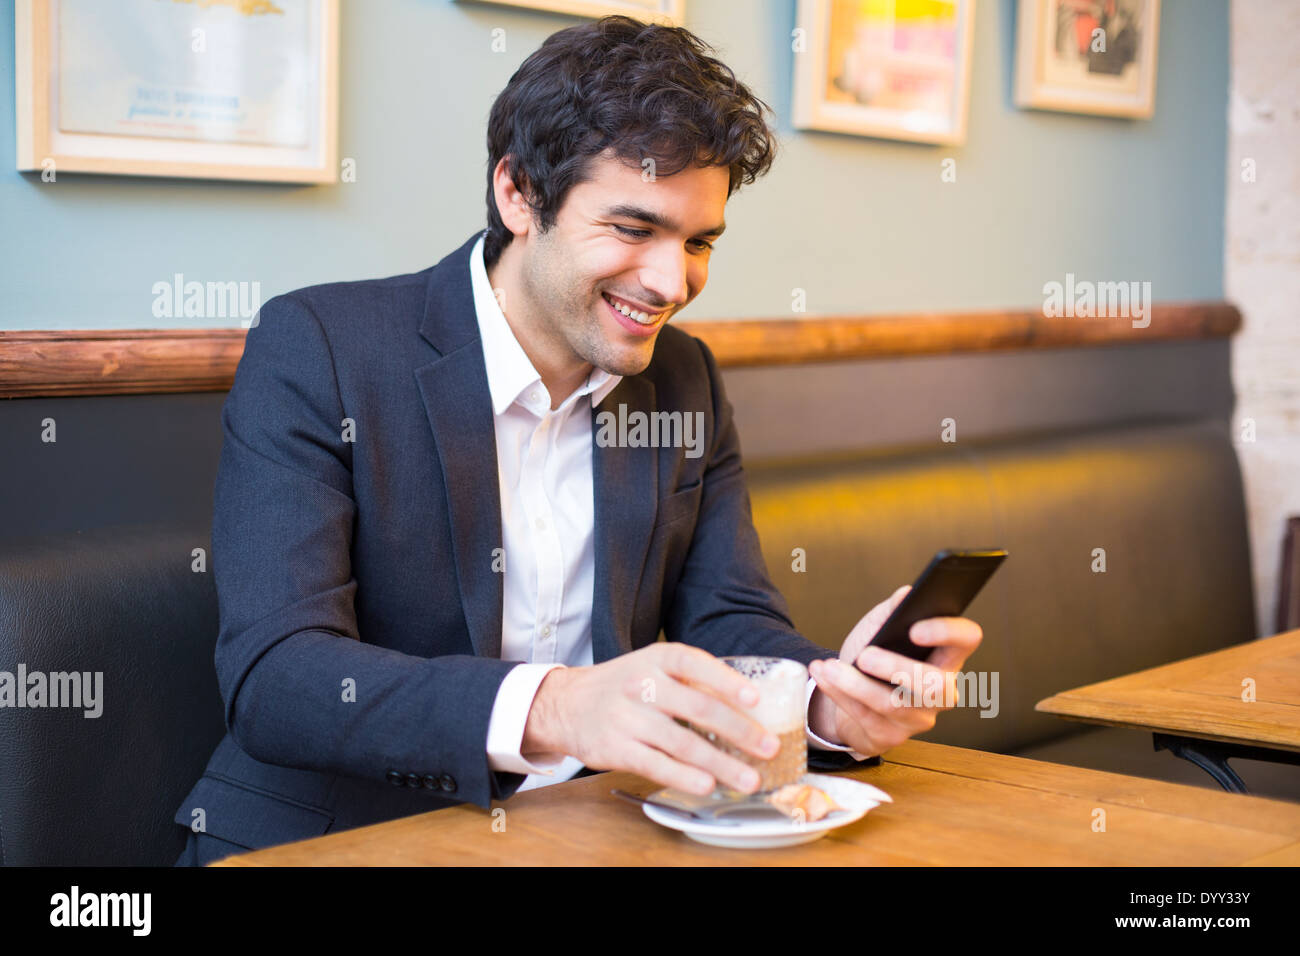 male cheerful restaurant smartphone cafe message sms Stock Photo